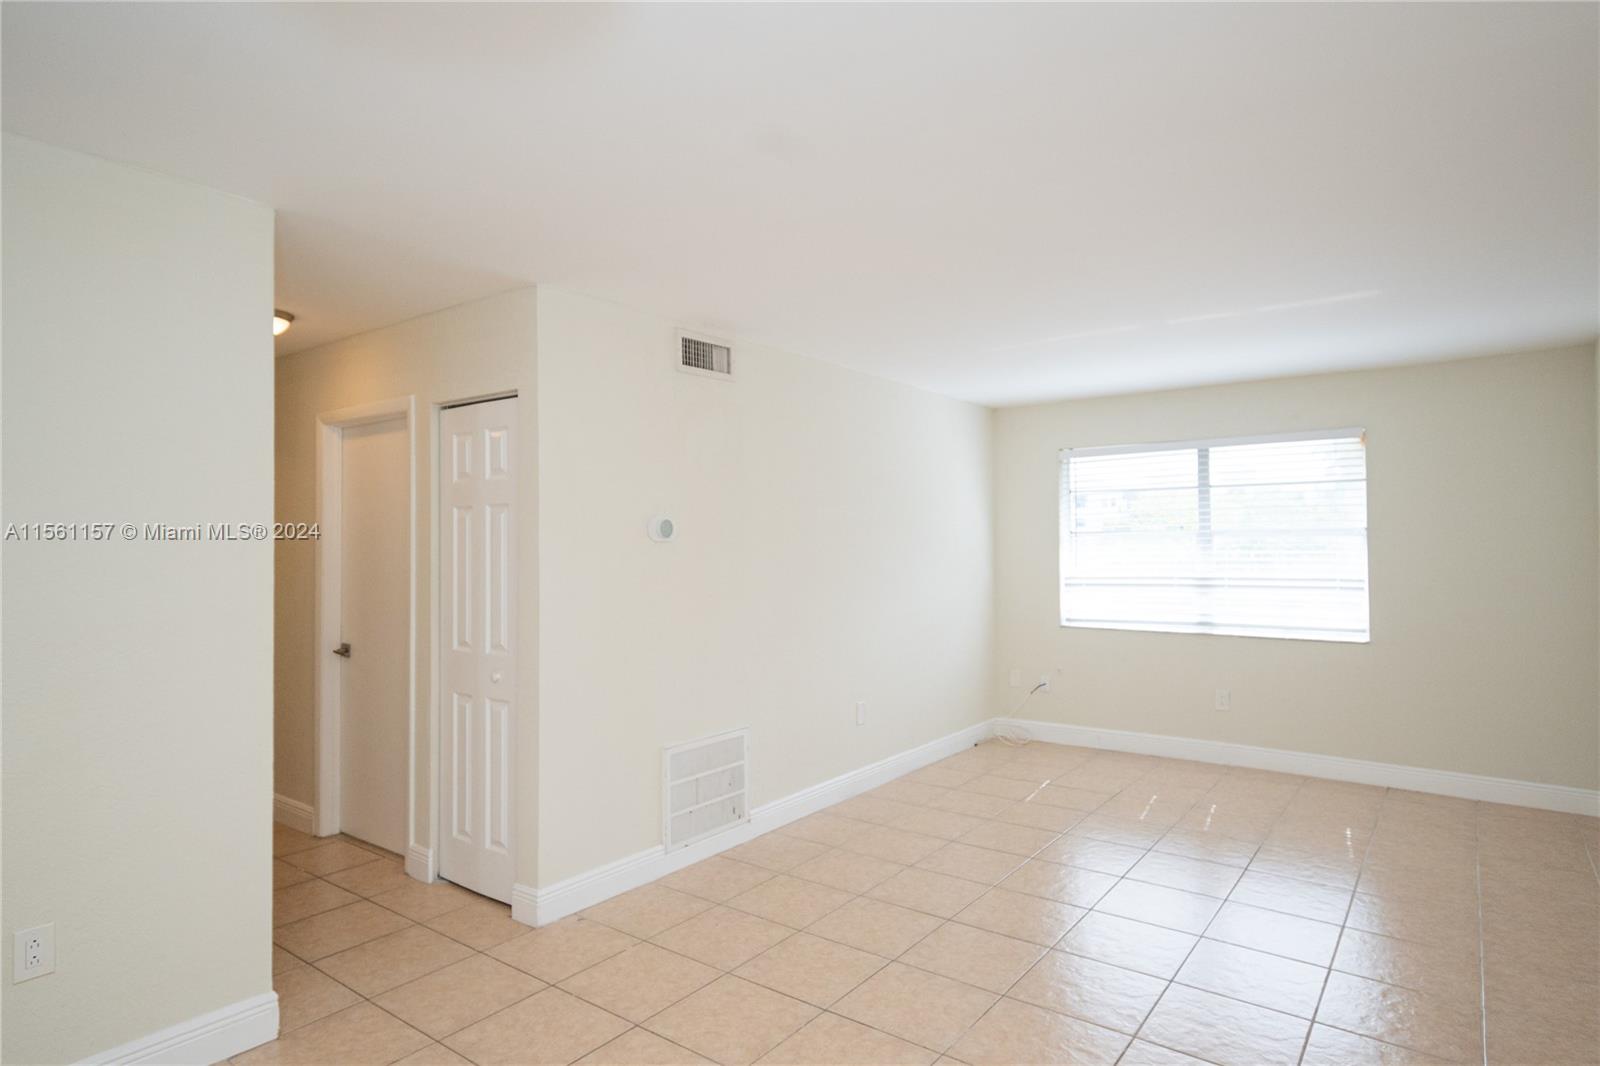 Great investment opportunity and a starter home in this well-kept community of Village Homes and Condos at Palmetto Bay. This updated Condo offers 1 bedroom,1 full bathroom, 1 assigned parking space.Great location close to US-1. It won't last! 
ONE BLOCK EAST OF US1 ON SW 174 STREET